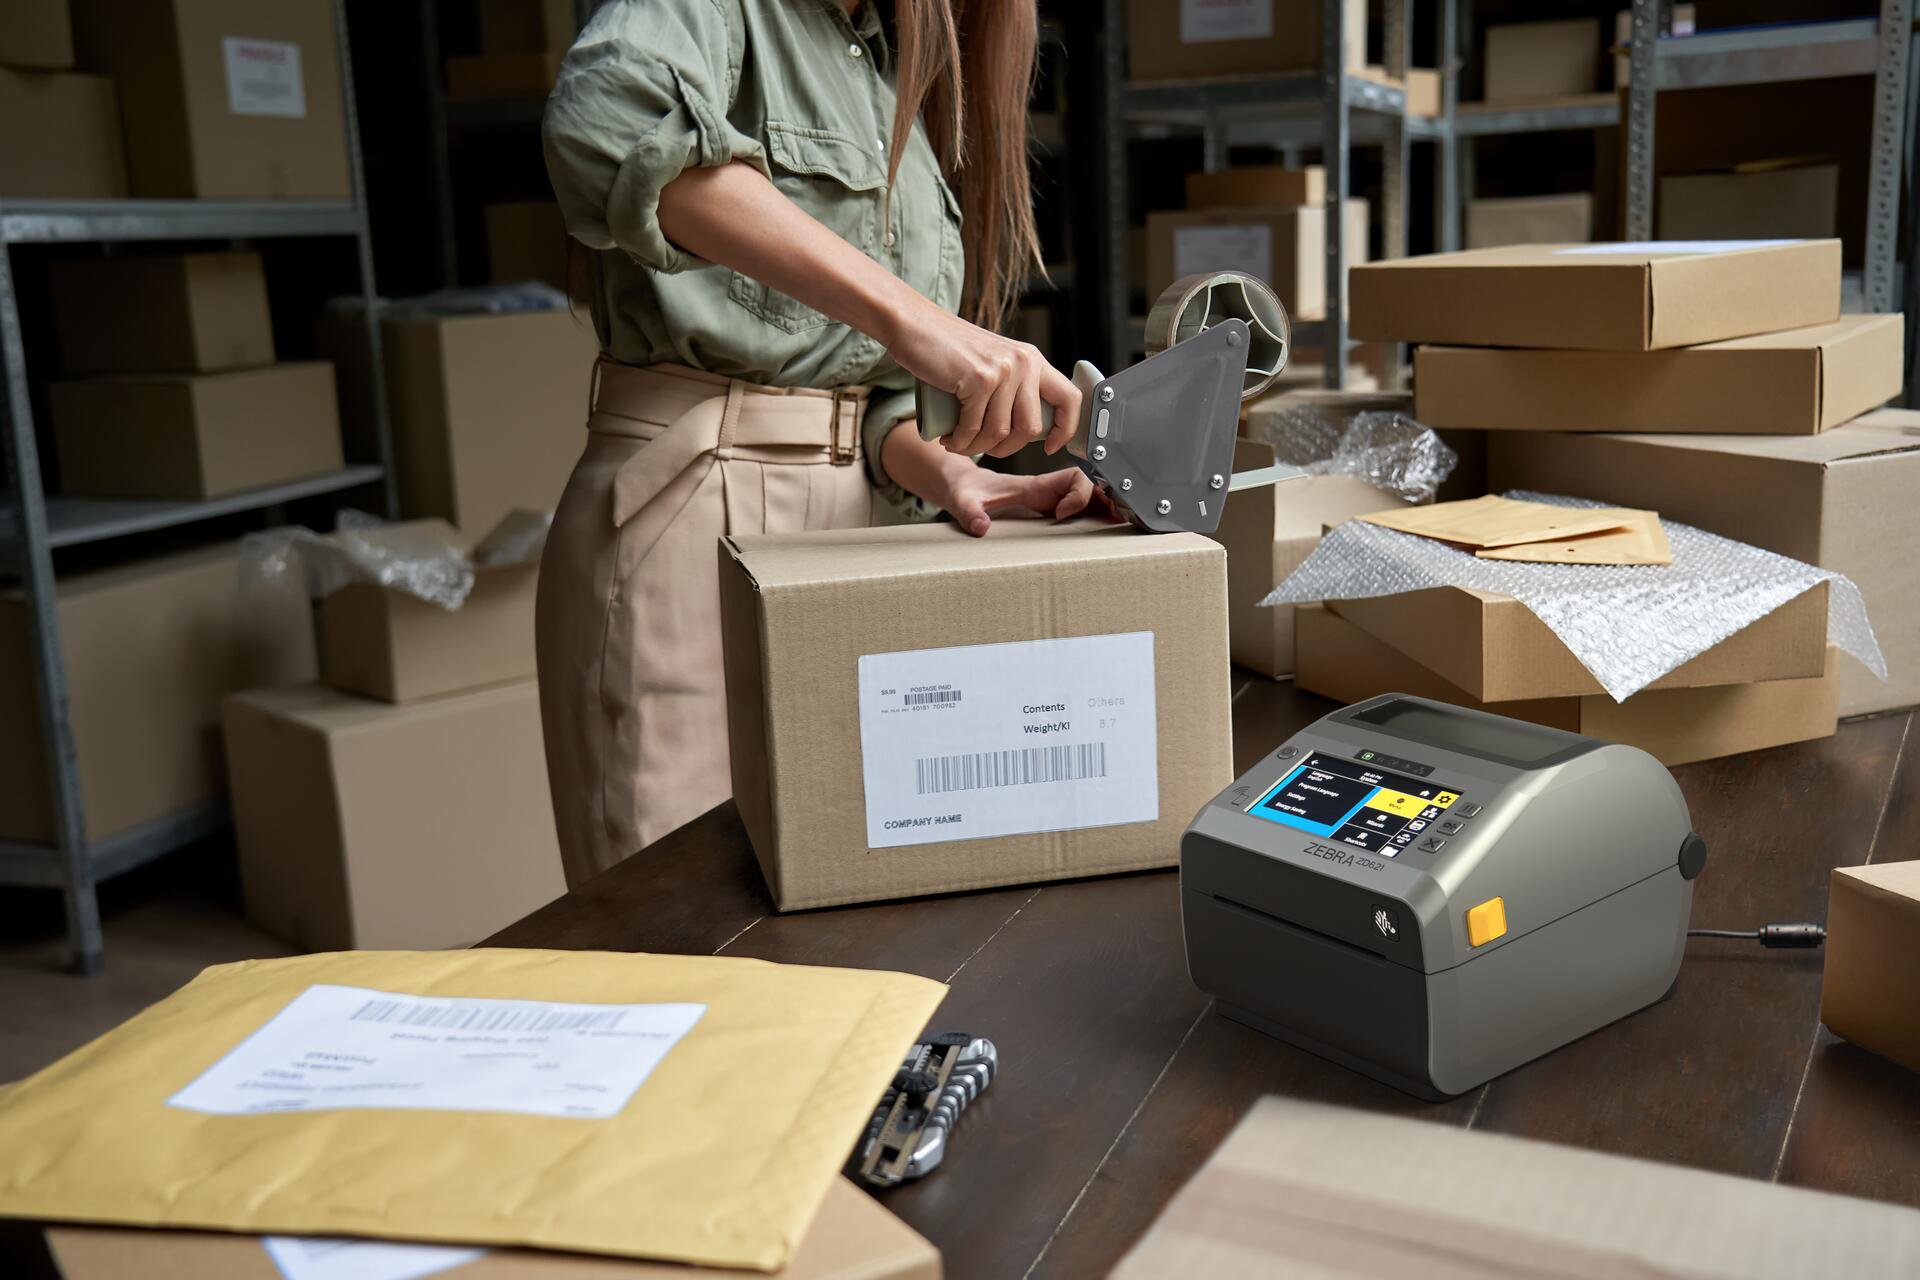 Worker packing boxes using a Zebra Technologies ZD621d printer to print packing labels